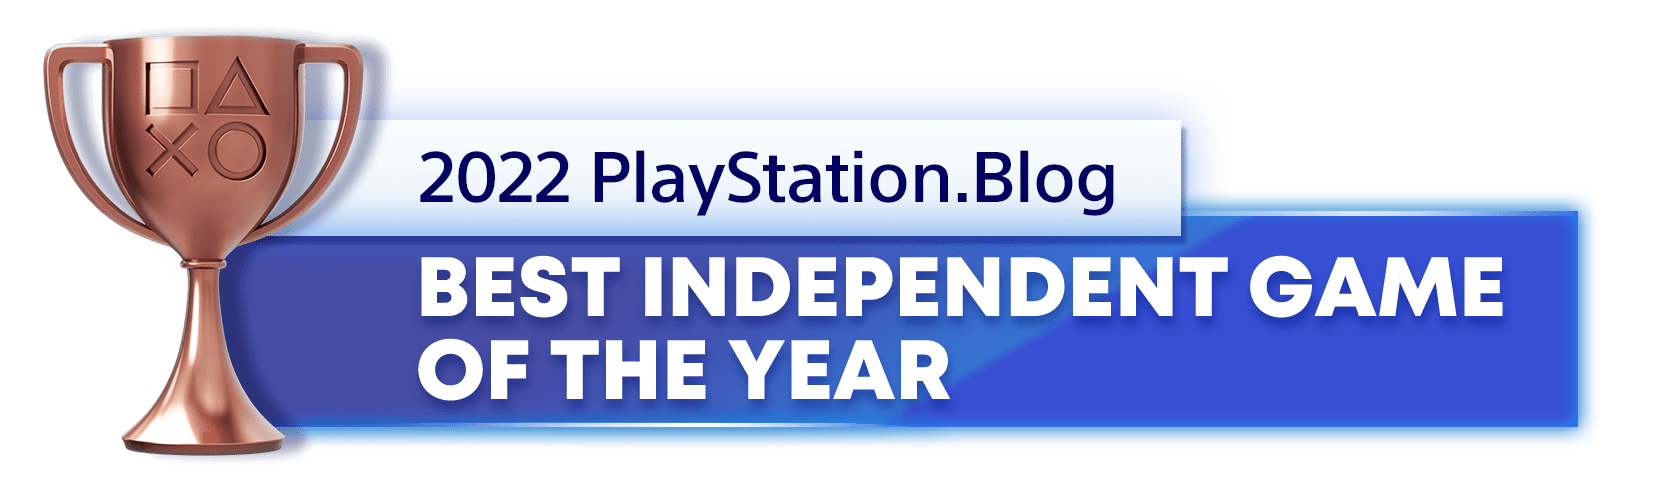 The “Board Game of the Year” winners have been announced